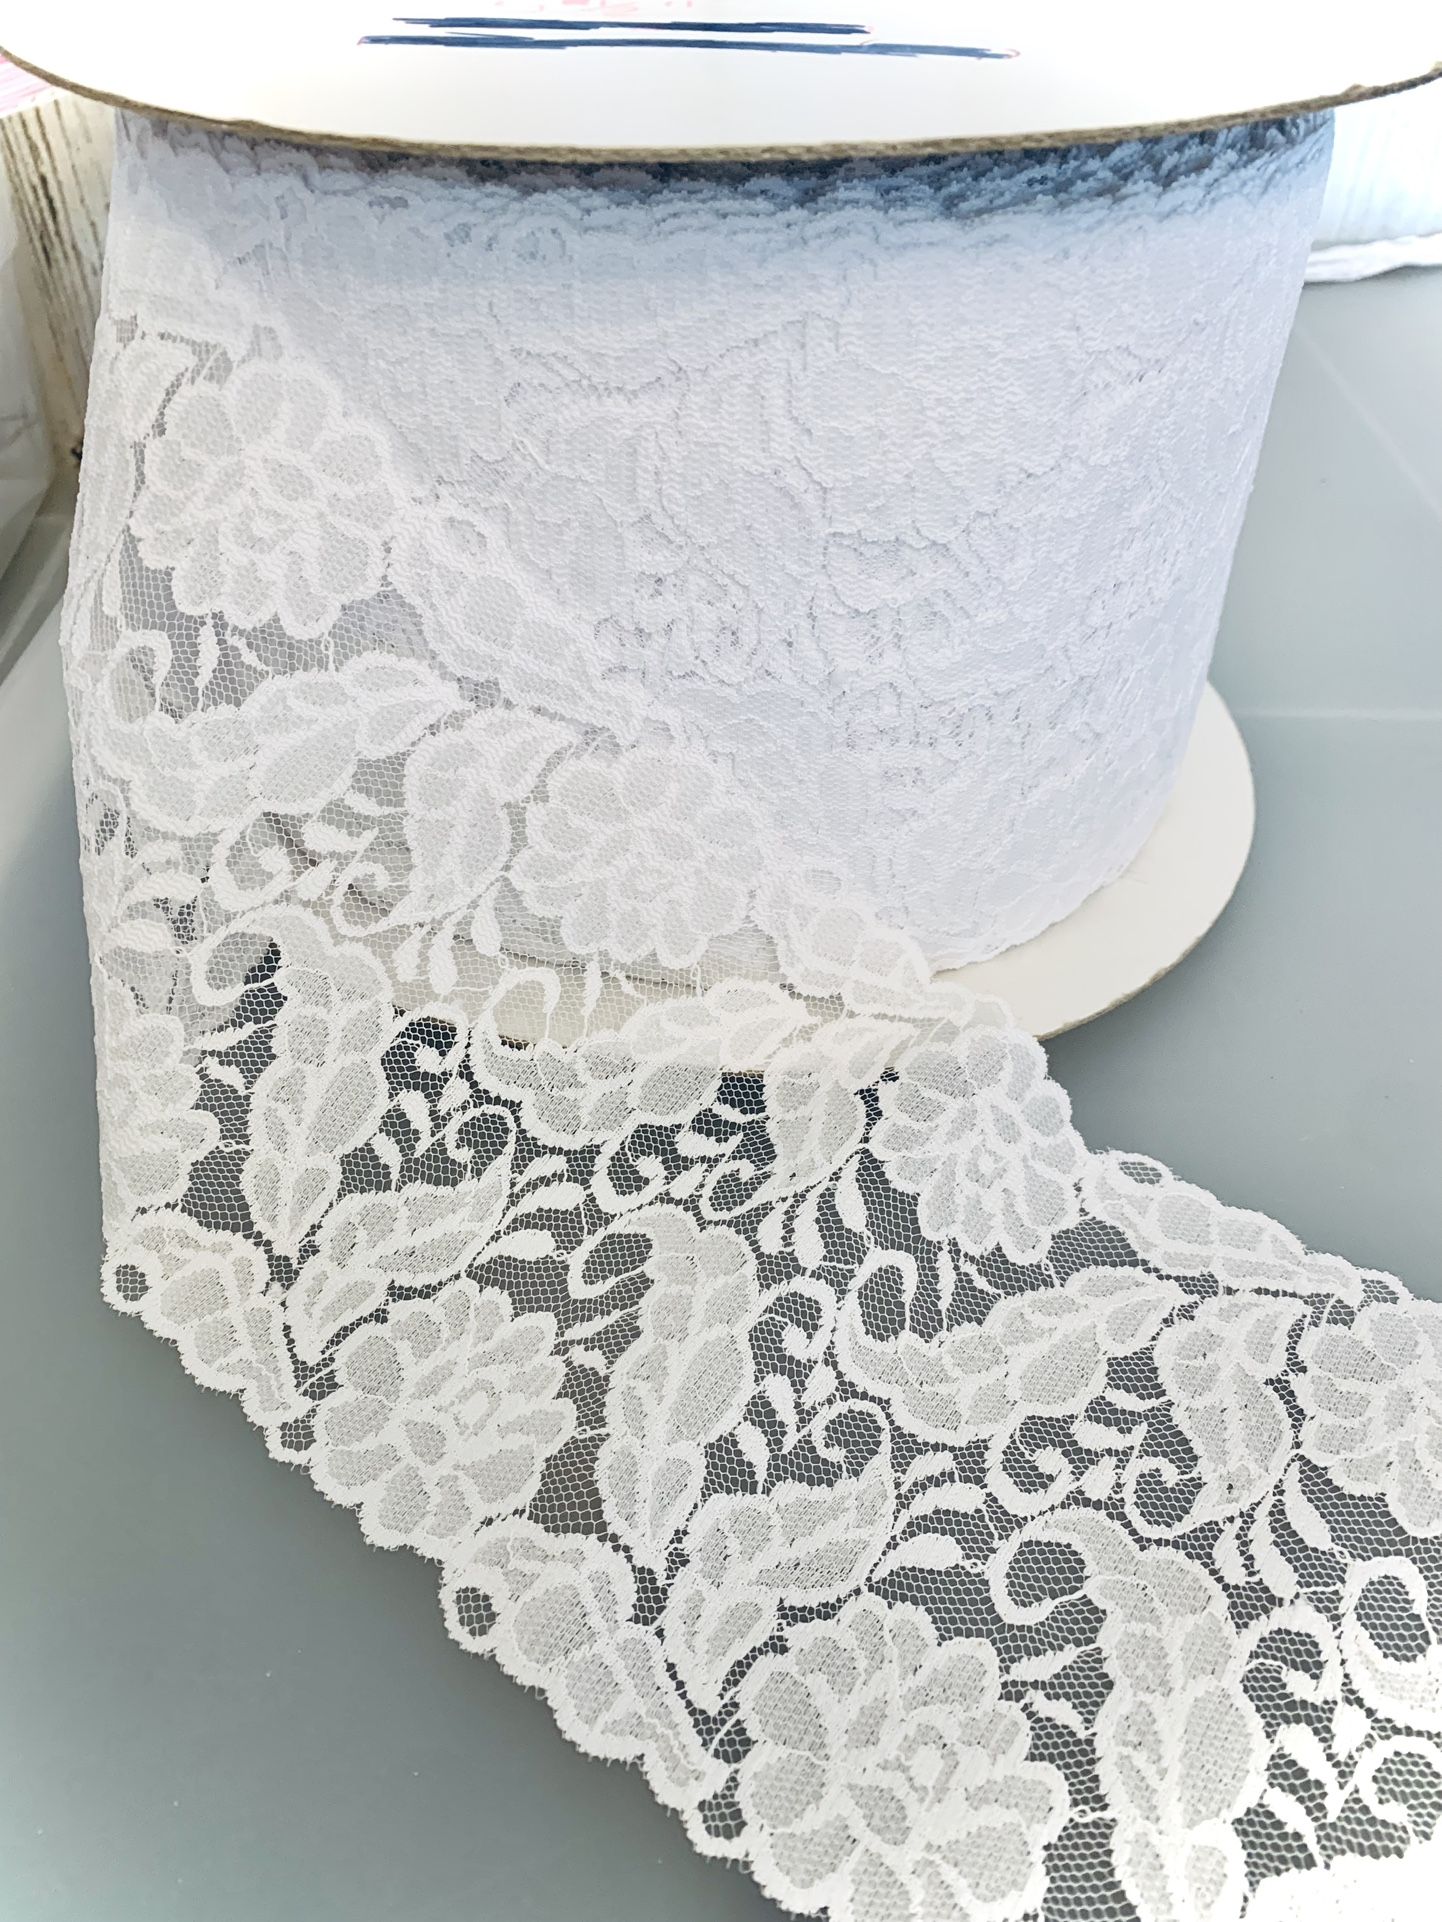 2 1/2 Yds of 5 1/2” W White Embroidered French Mesh Lace by Liberty Fabrics #041724A3